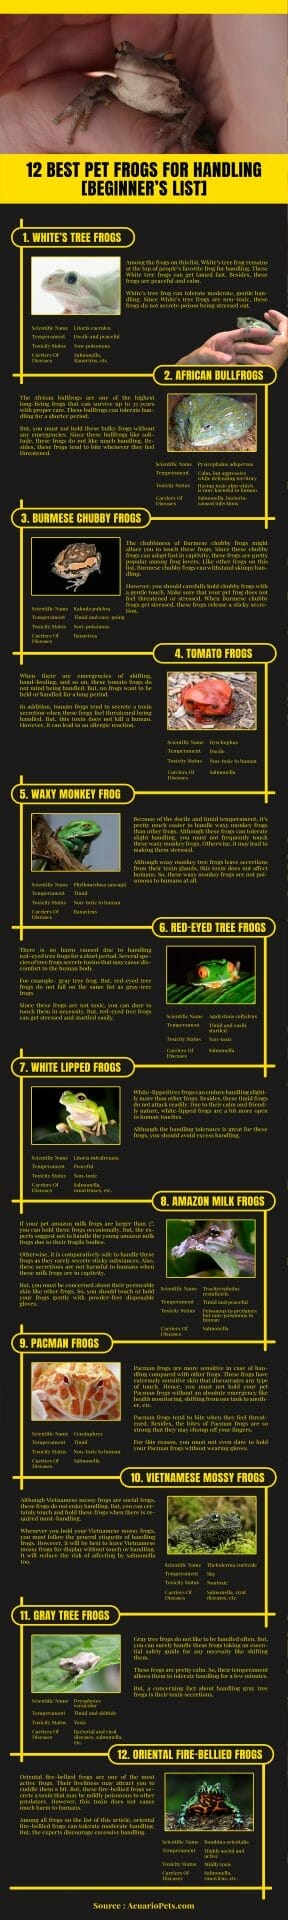 best pet frogs for handling infographic